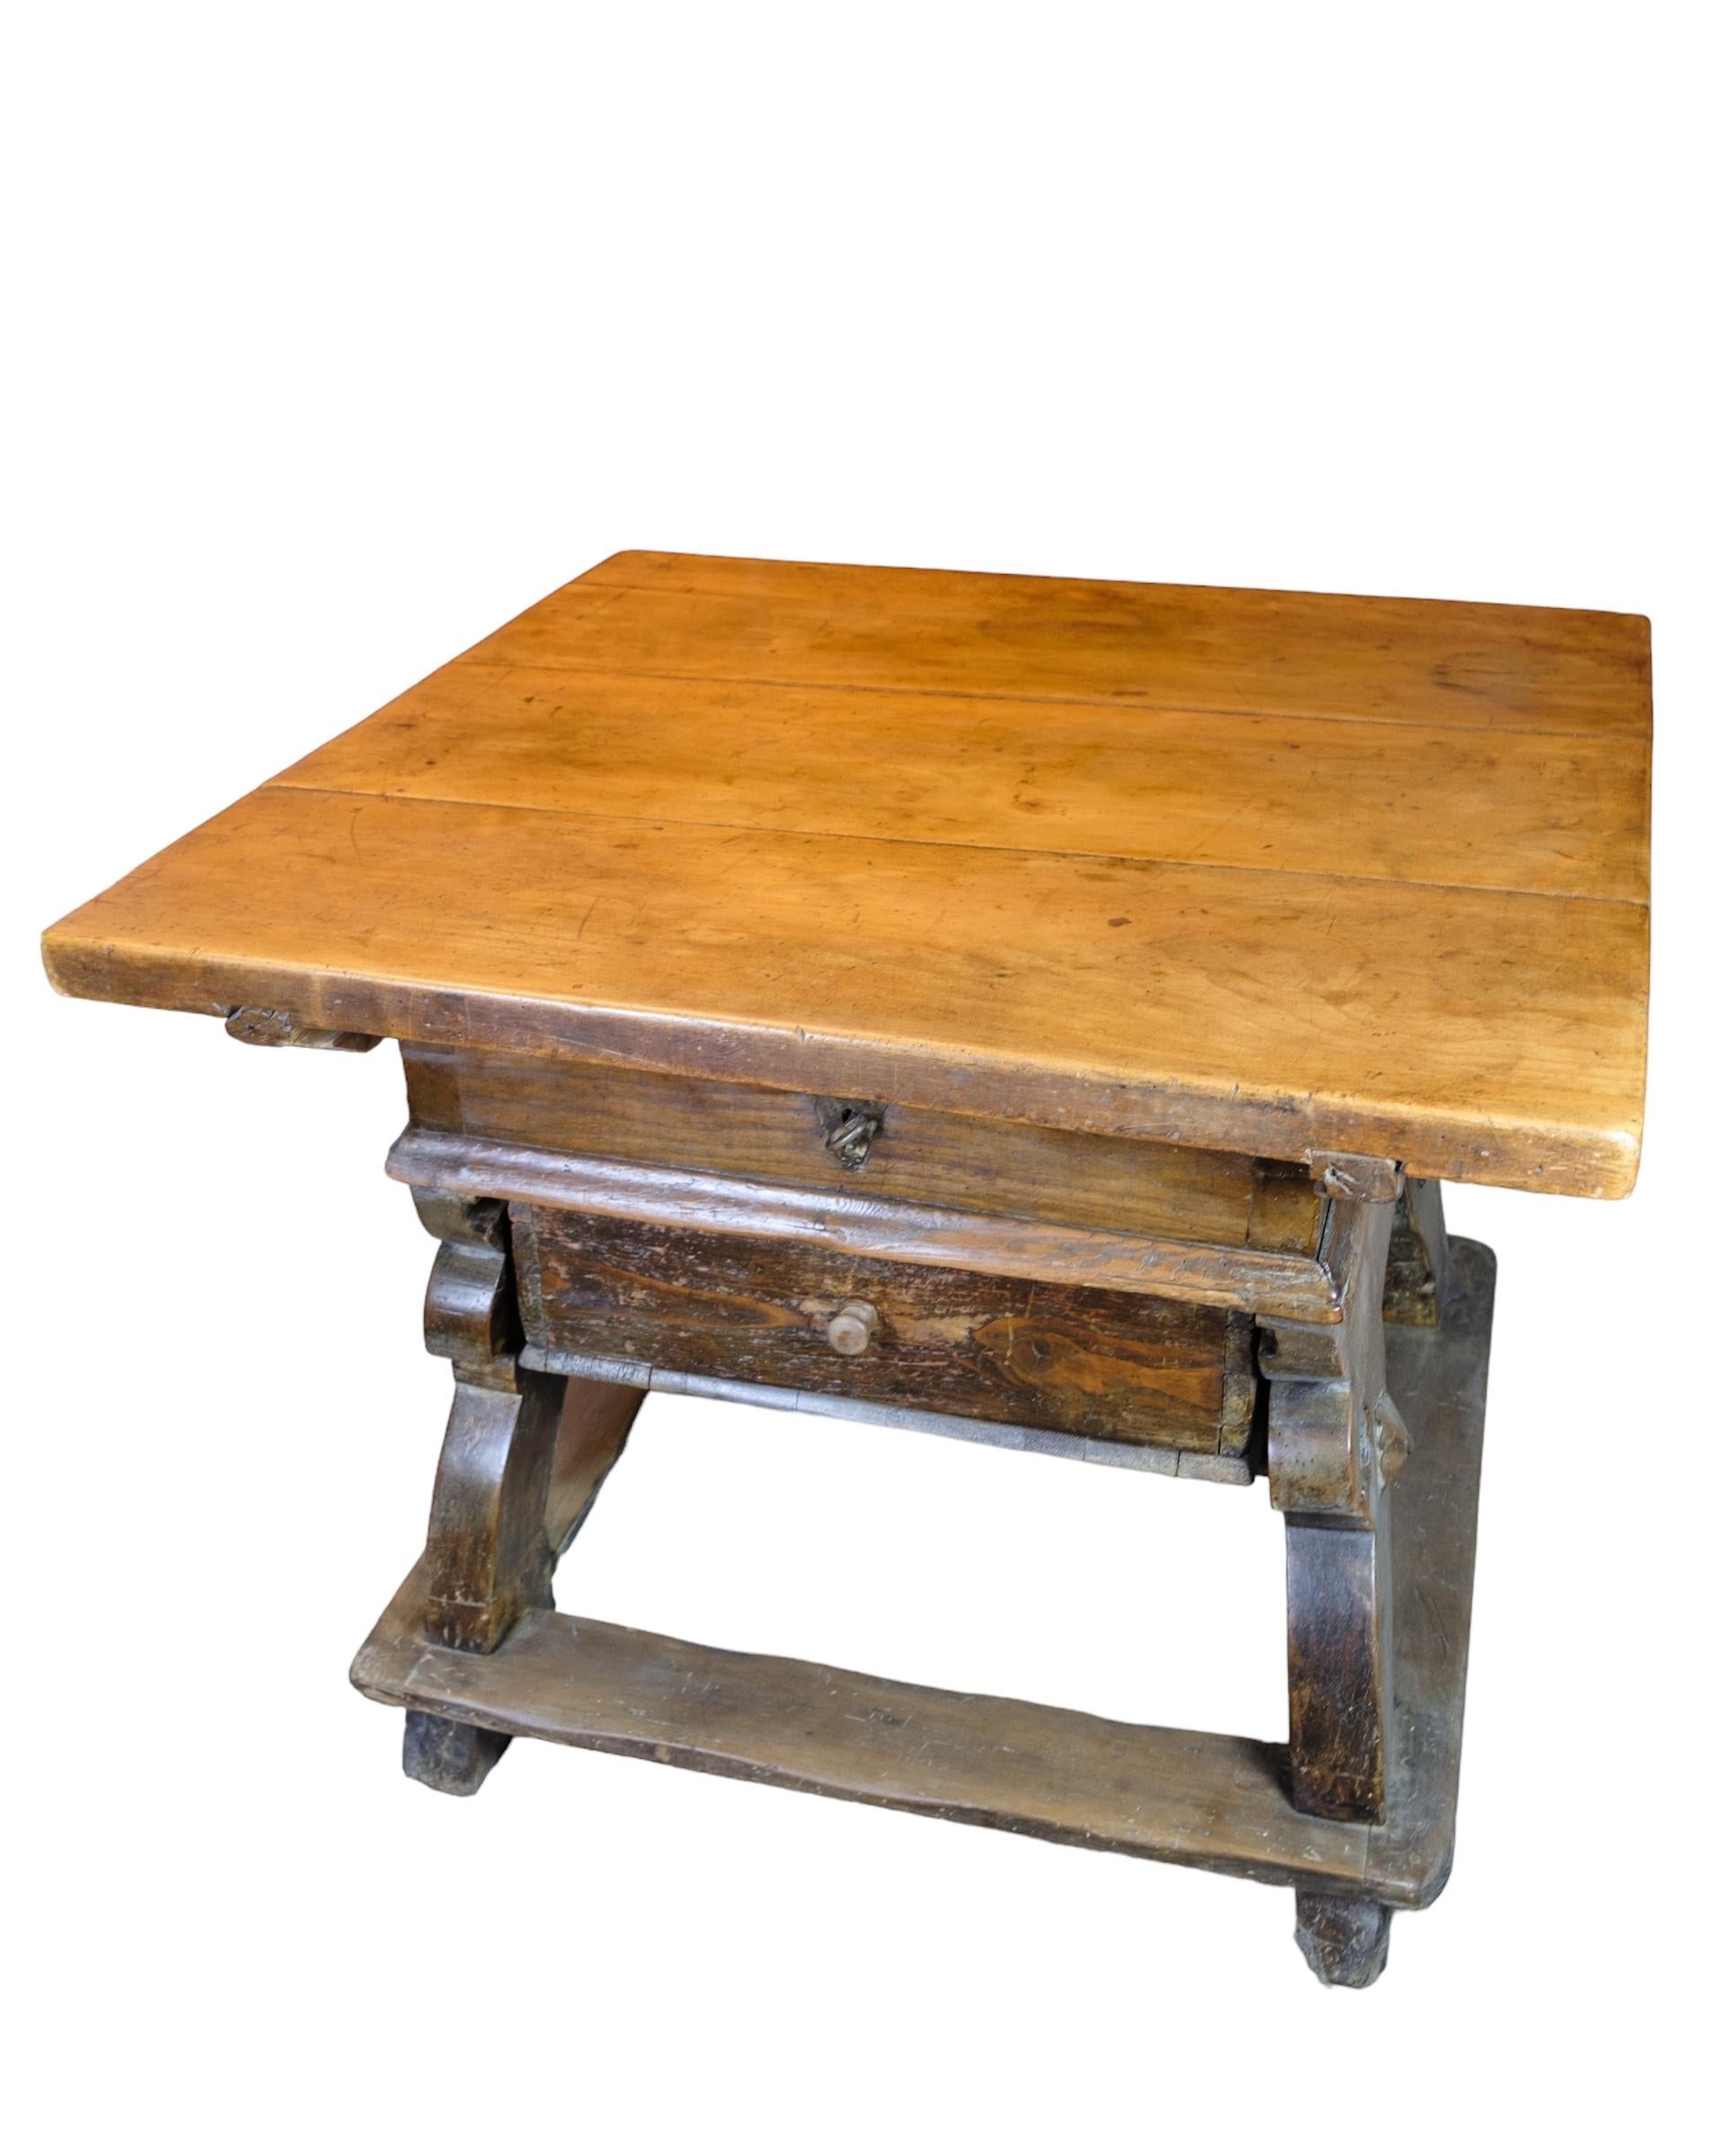 Swiss cheese table in oak with a secret compartment under the tabletop hidden by a drawer from the 1720s.
Measurements in cm: H:76 W:100 D:100